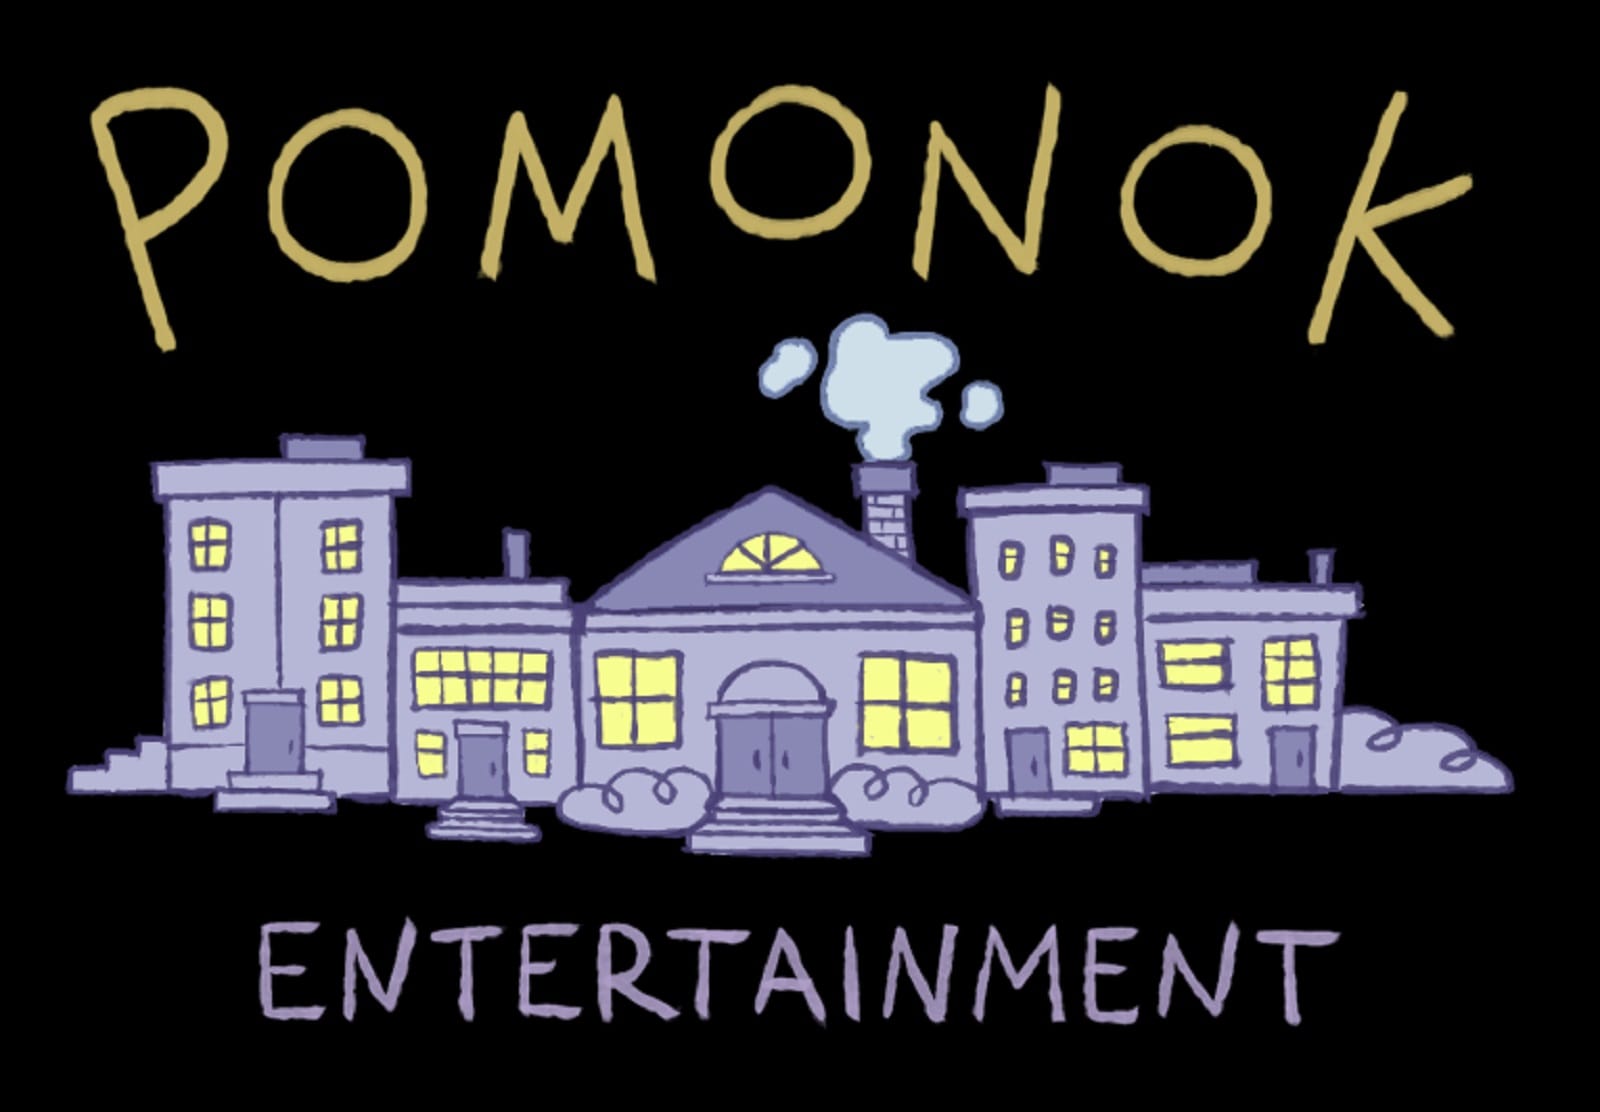 An illustration of purple homes against a black background. The word "Pomonok" is in yellow and "Entertainment" is in purple.